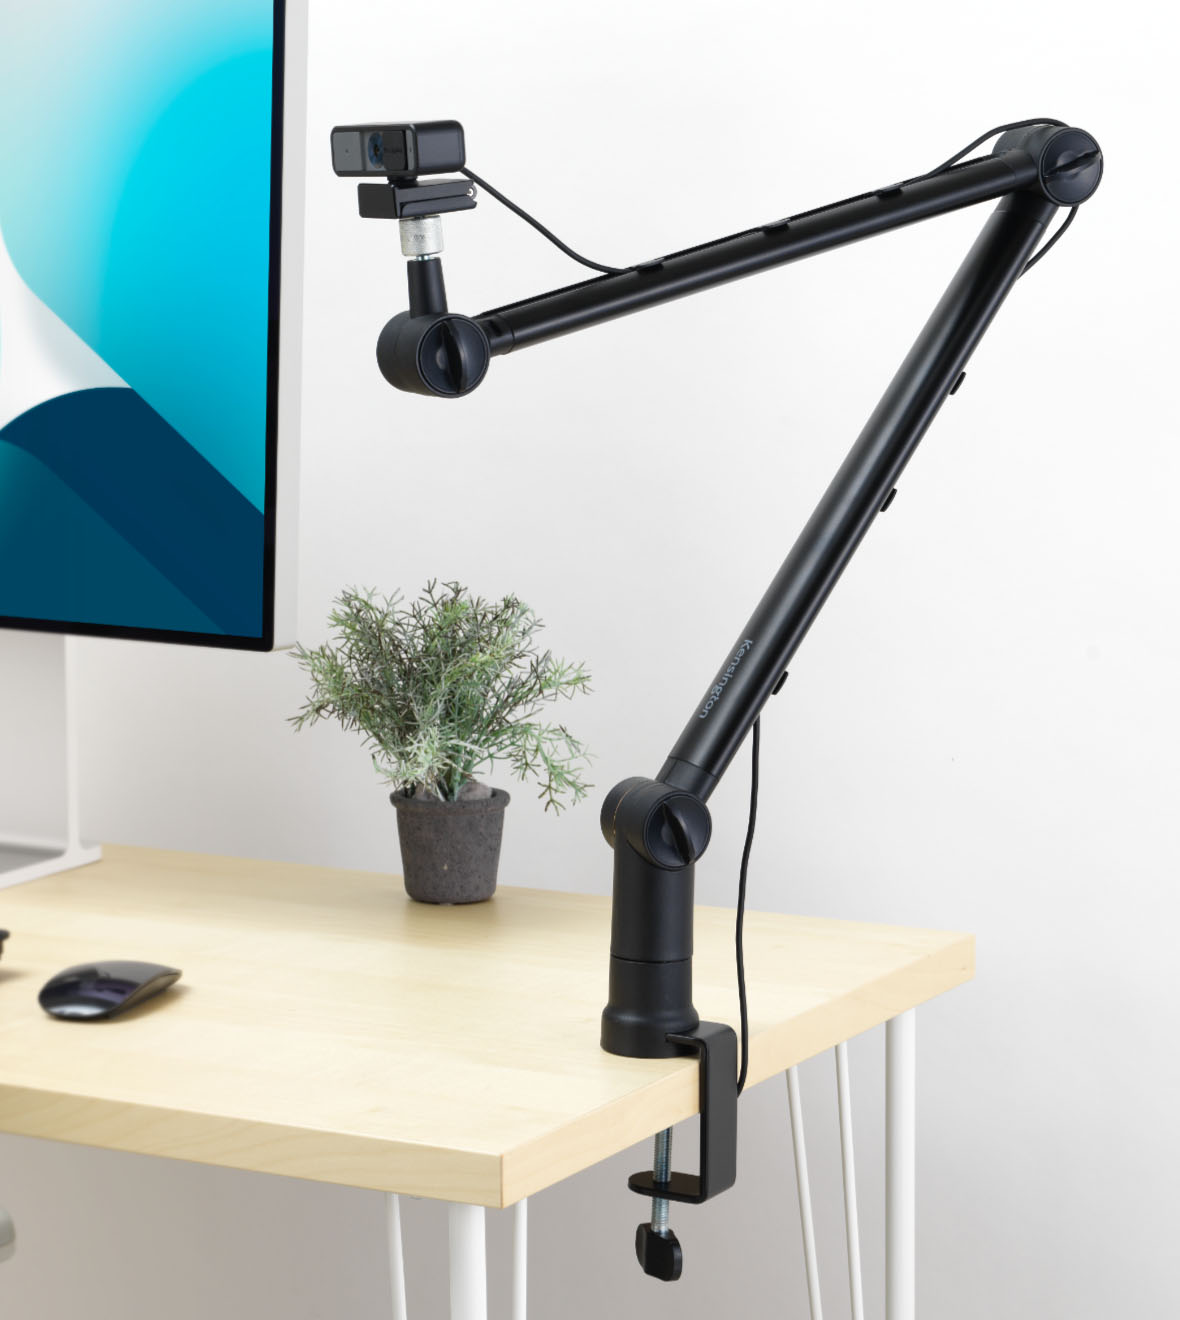 A1020 Boom Arm connected to desk